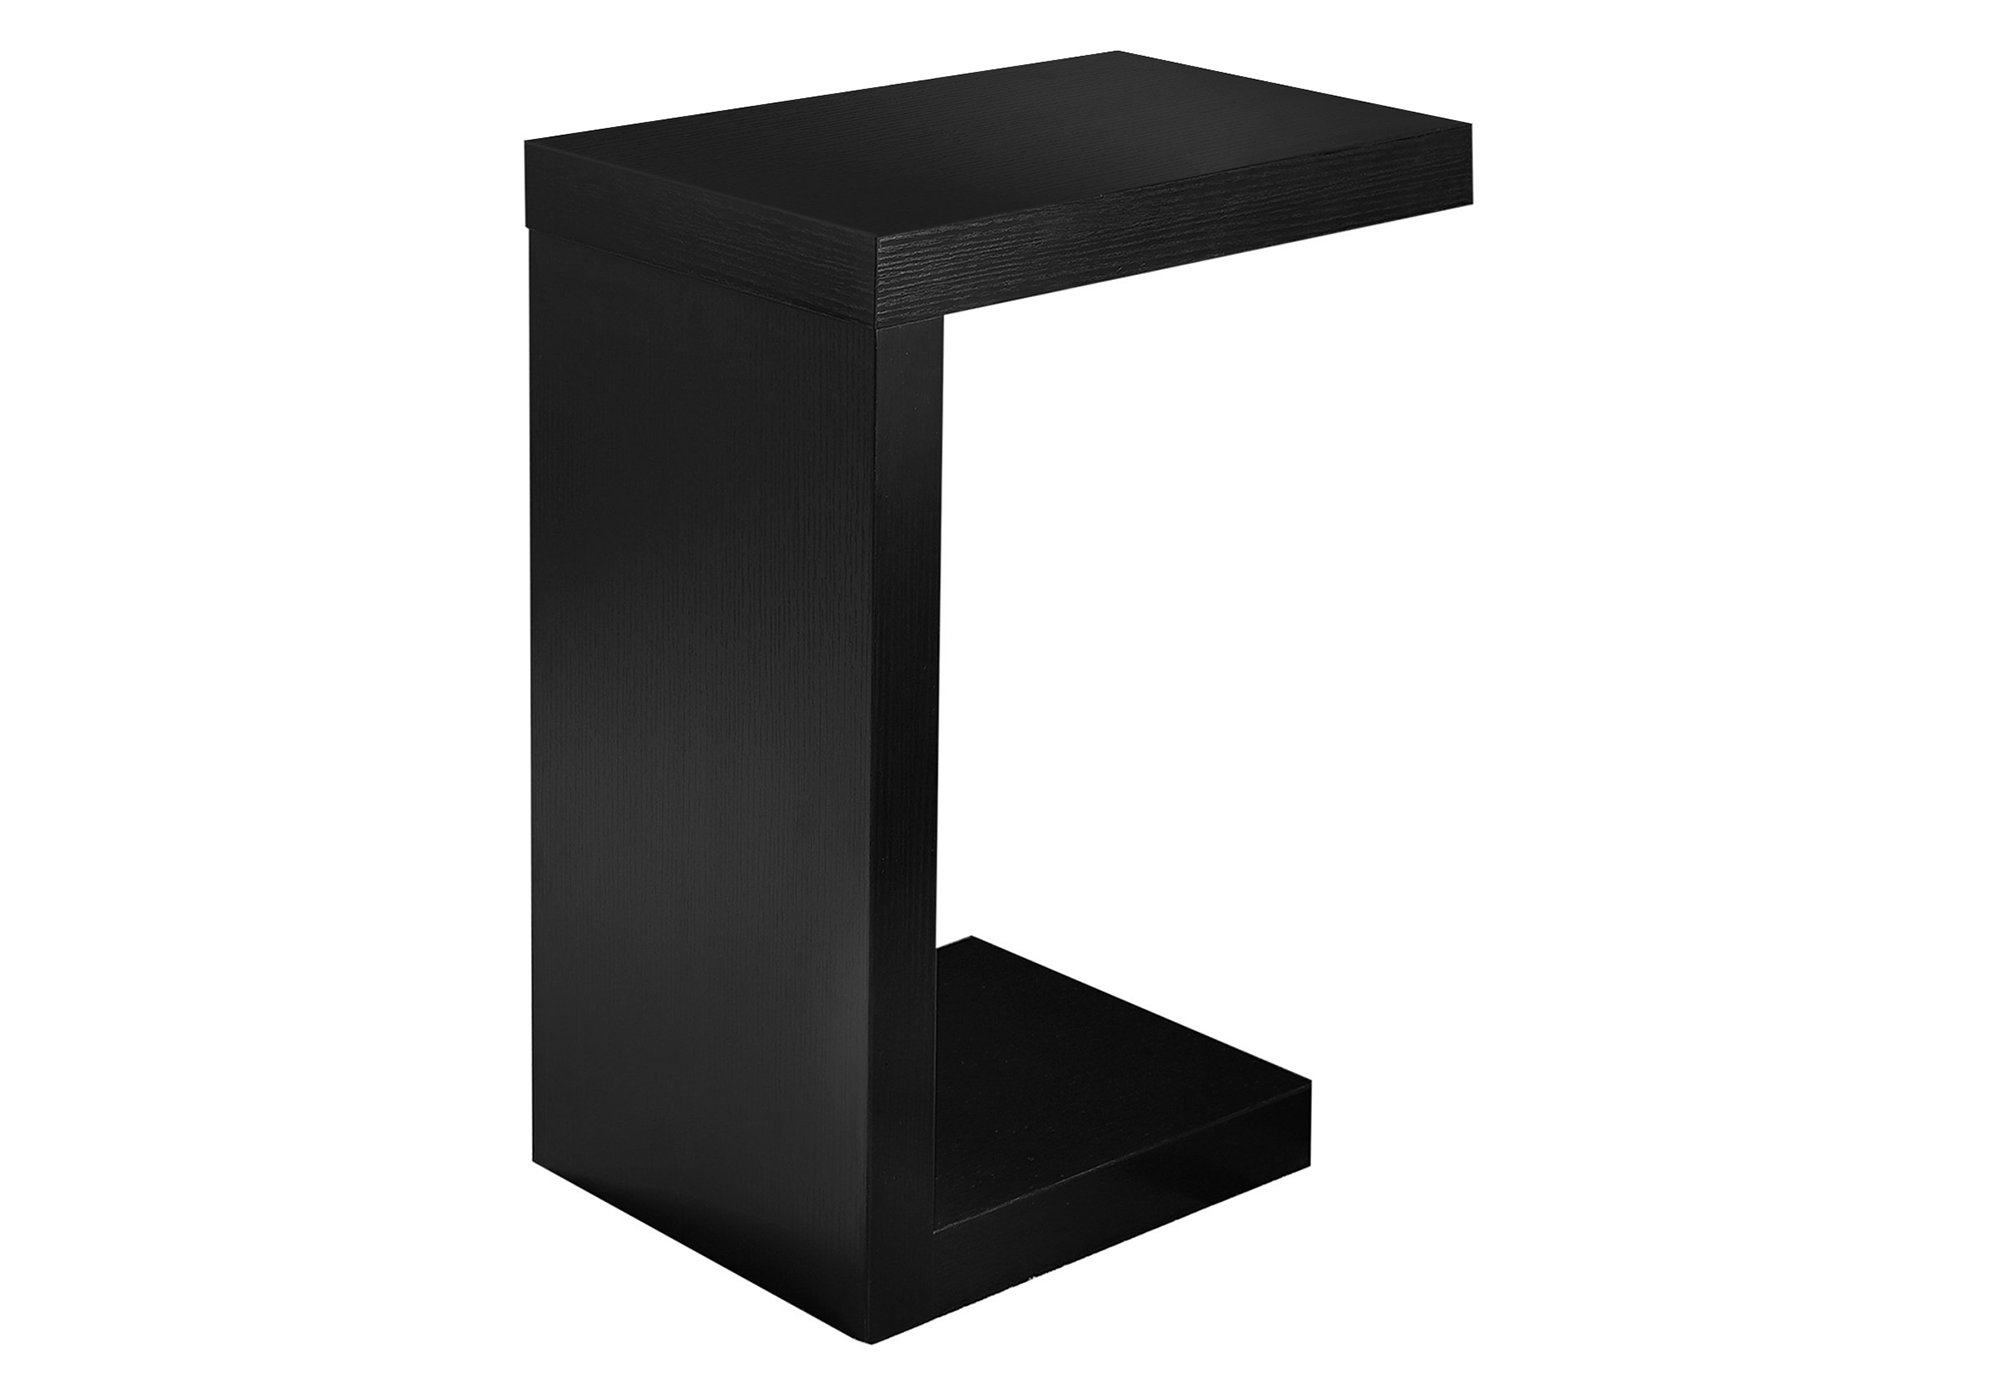 11.5" x 18" x 24" Black Hollow Core Particle Board Accent Table